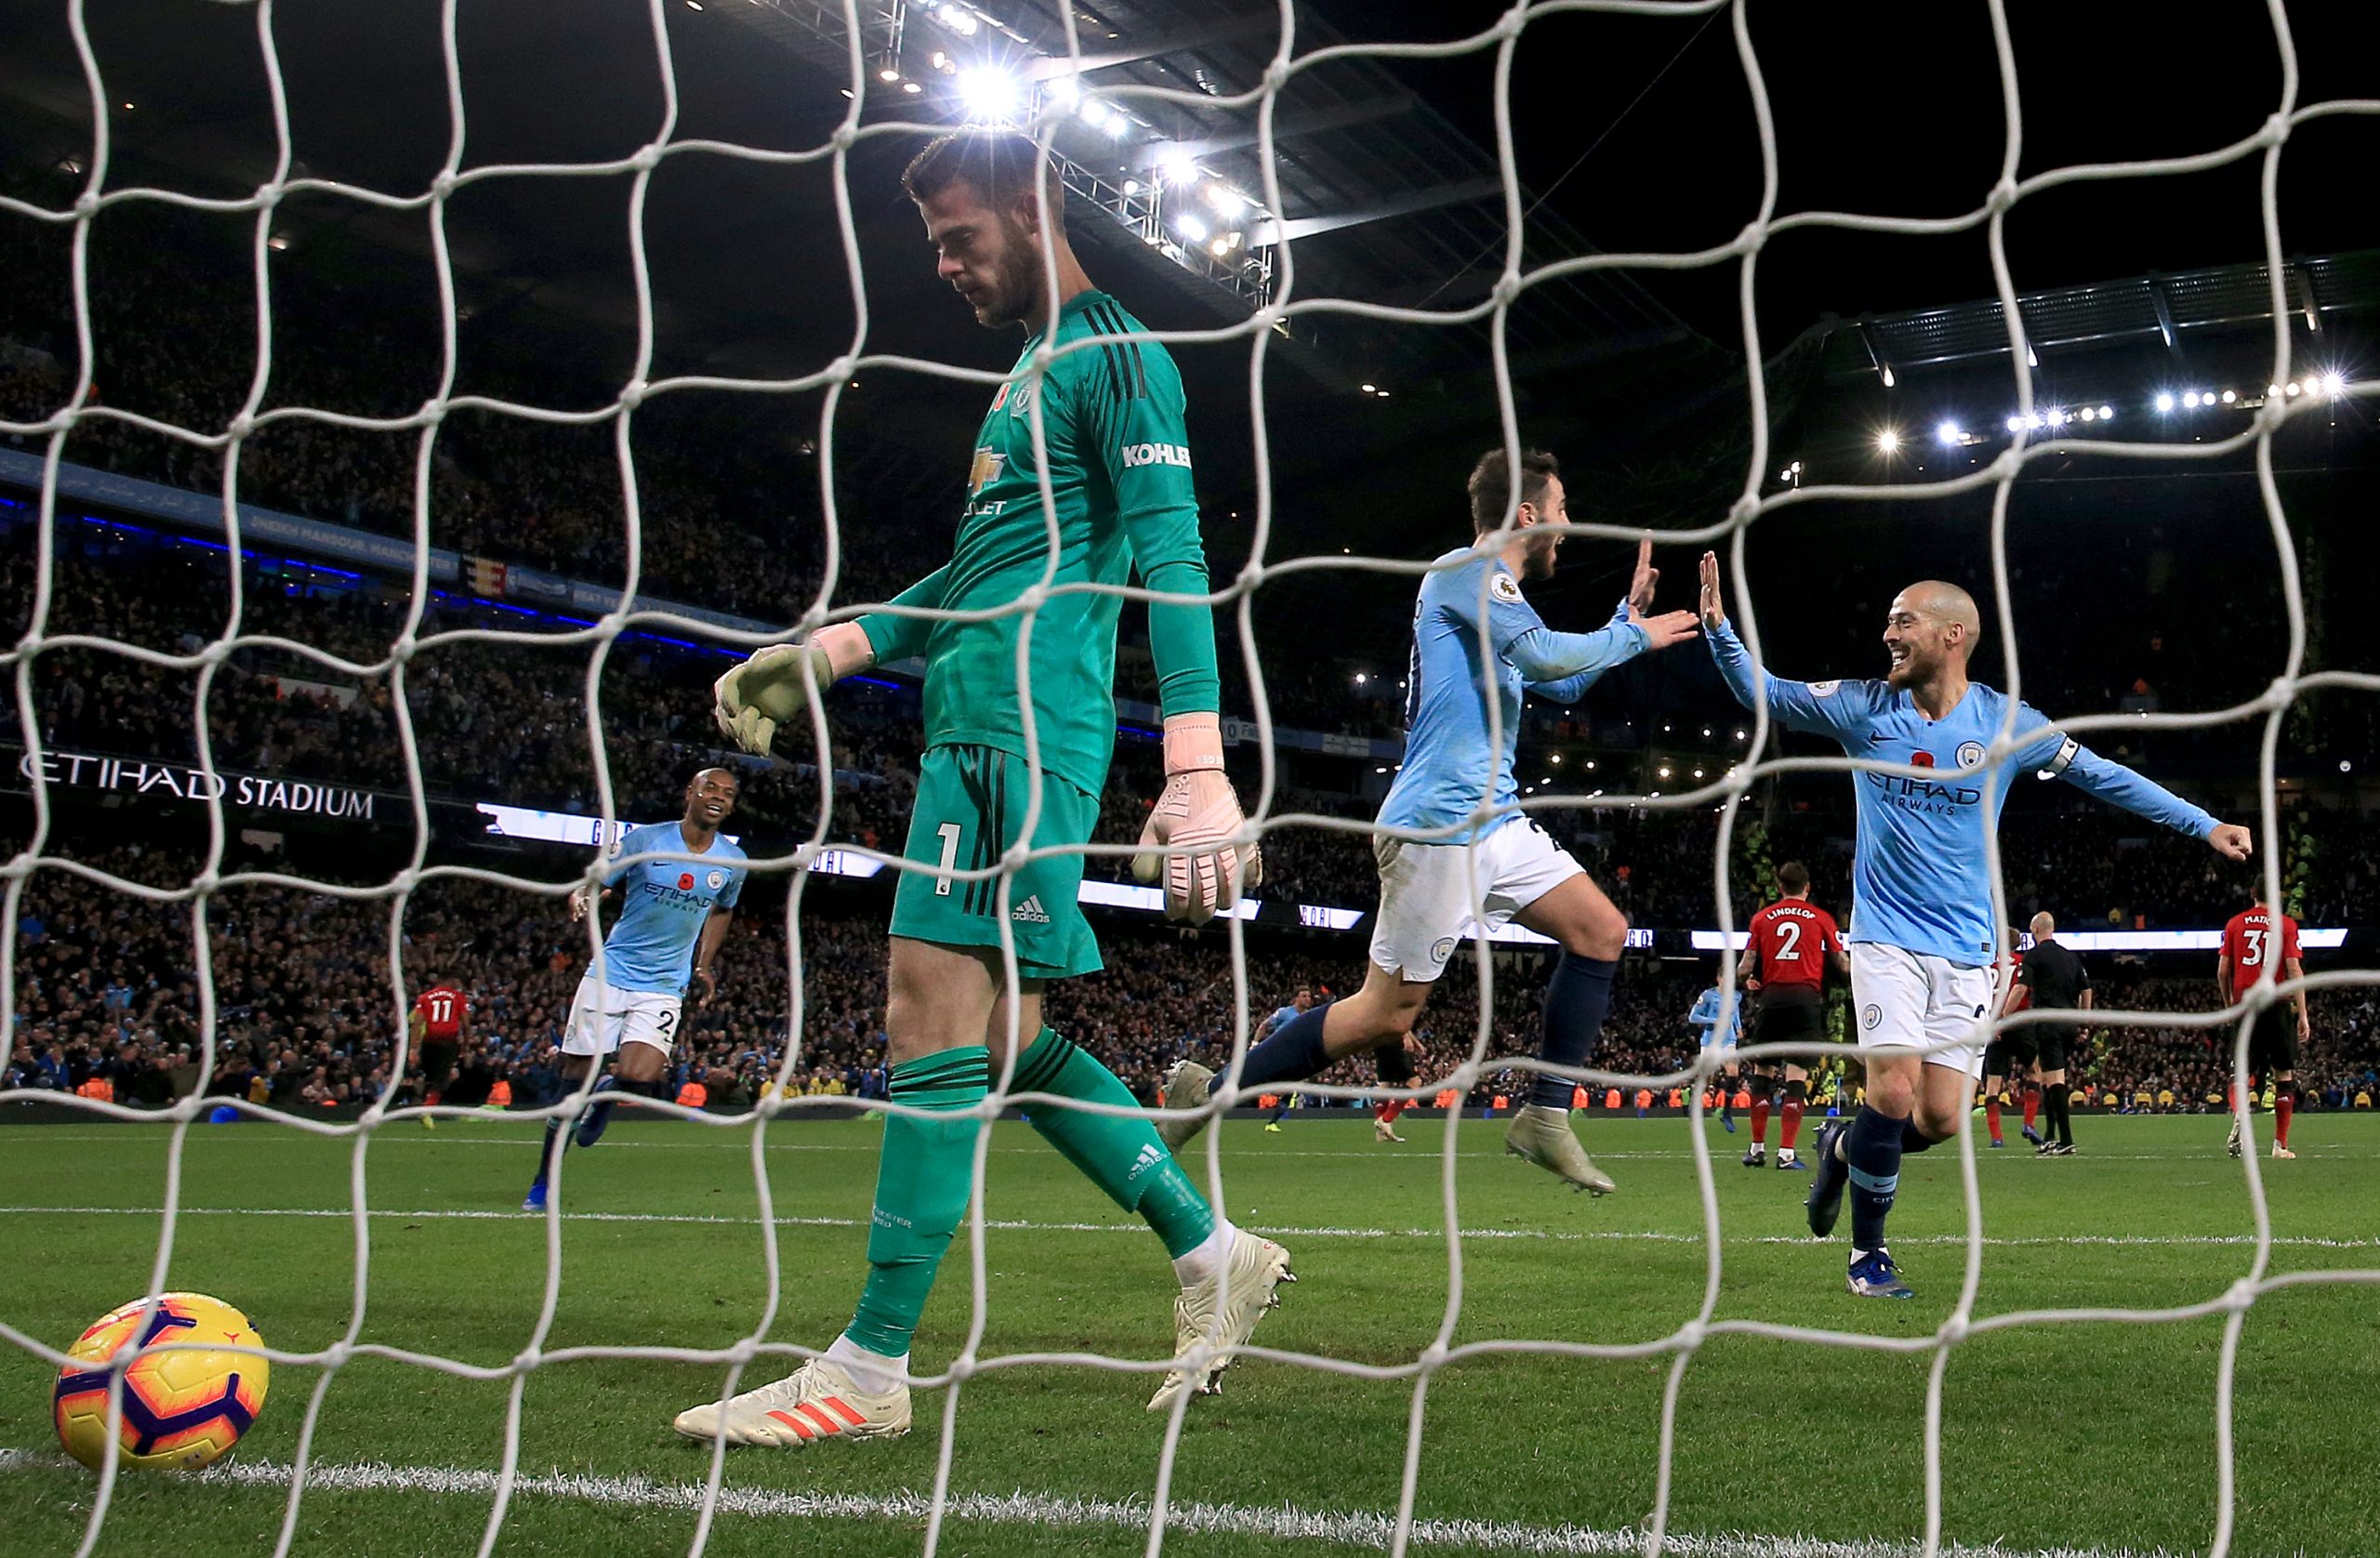 Despite Manchester United’s Collapse, David De Gea Remains Strong in Goal